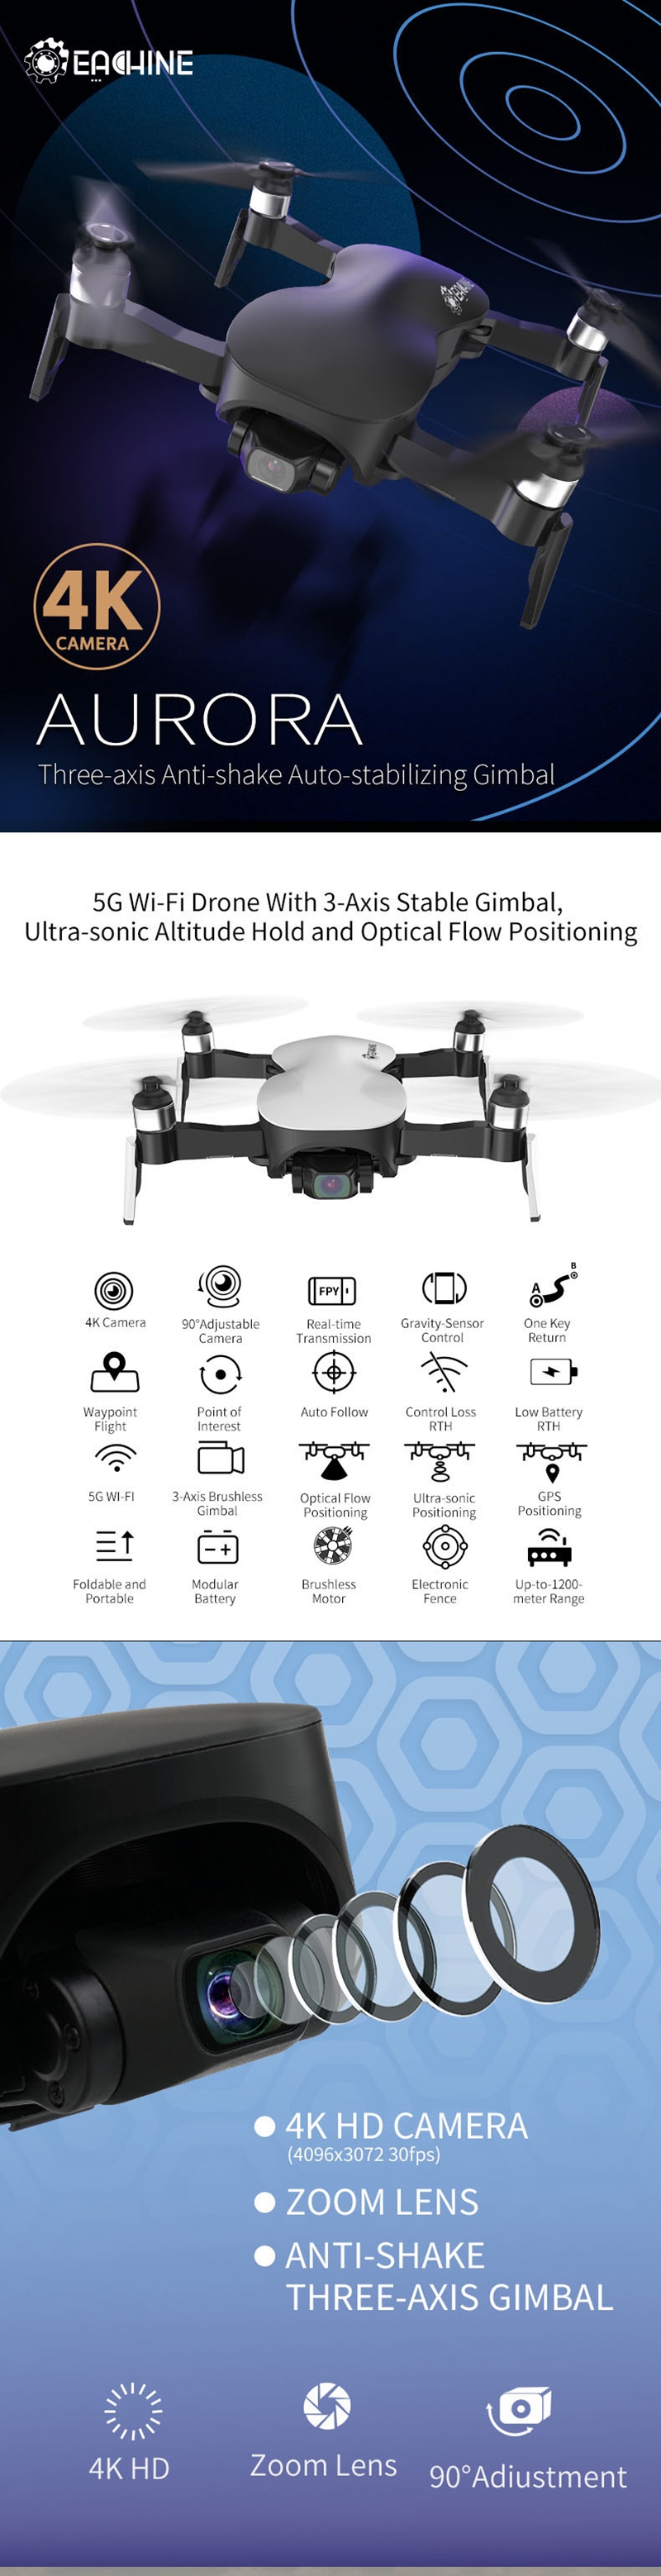 Eachine EX4 5G WIFI 1.2KM FPV GPS With 4K HD Camera 3-Axis Stable Gimbal RC Drone Quadcopter+Eachine E57 WiFi FPV Selfie Drone With 2MP 720P HD Camera RC Drone Quadcopter